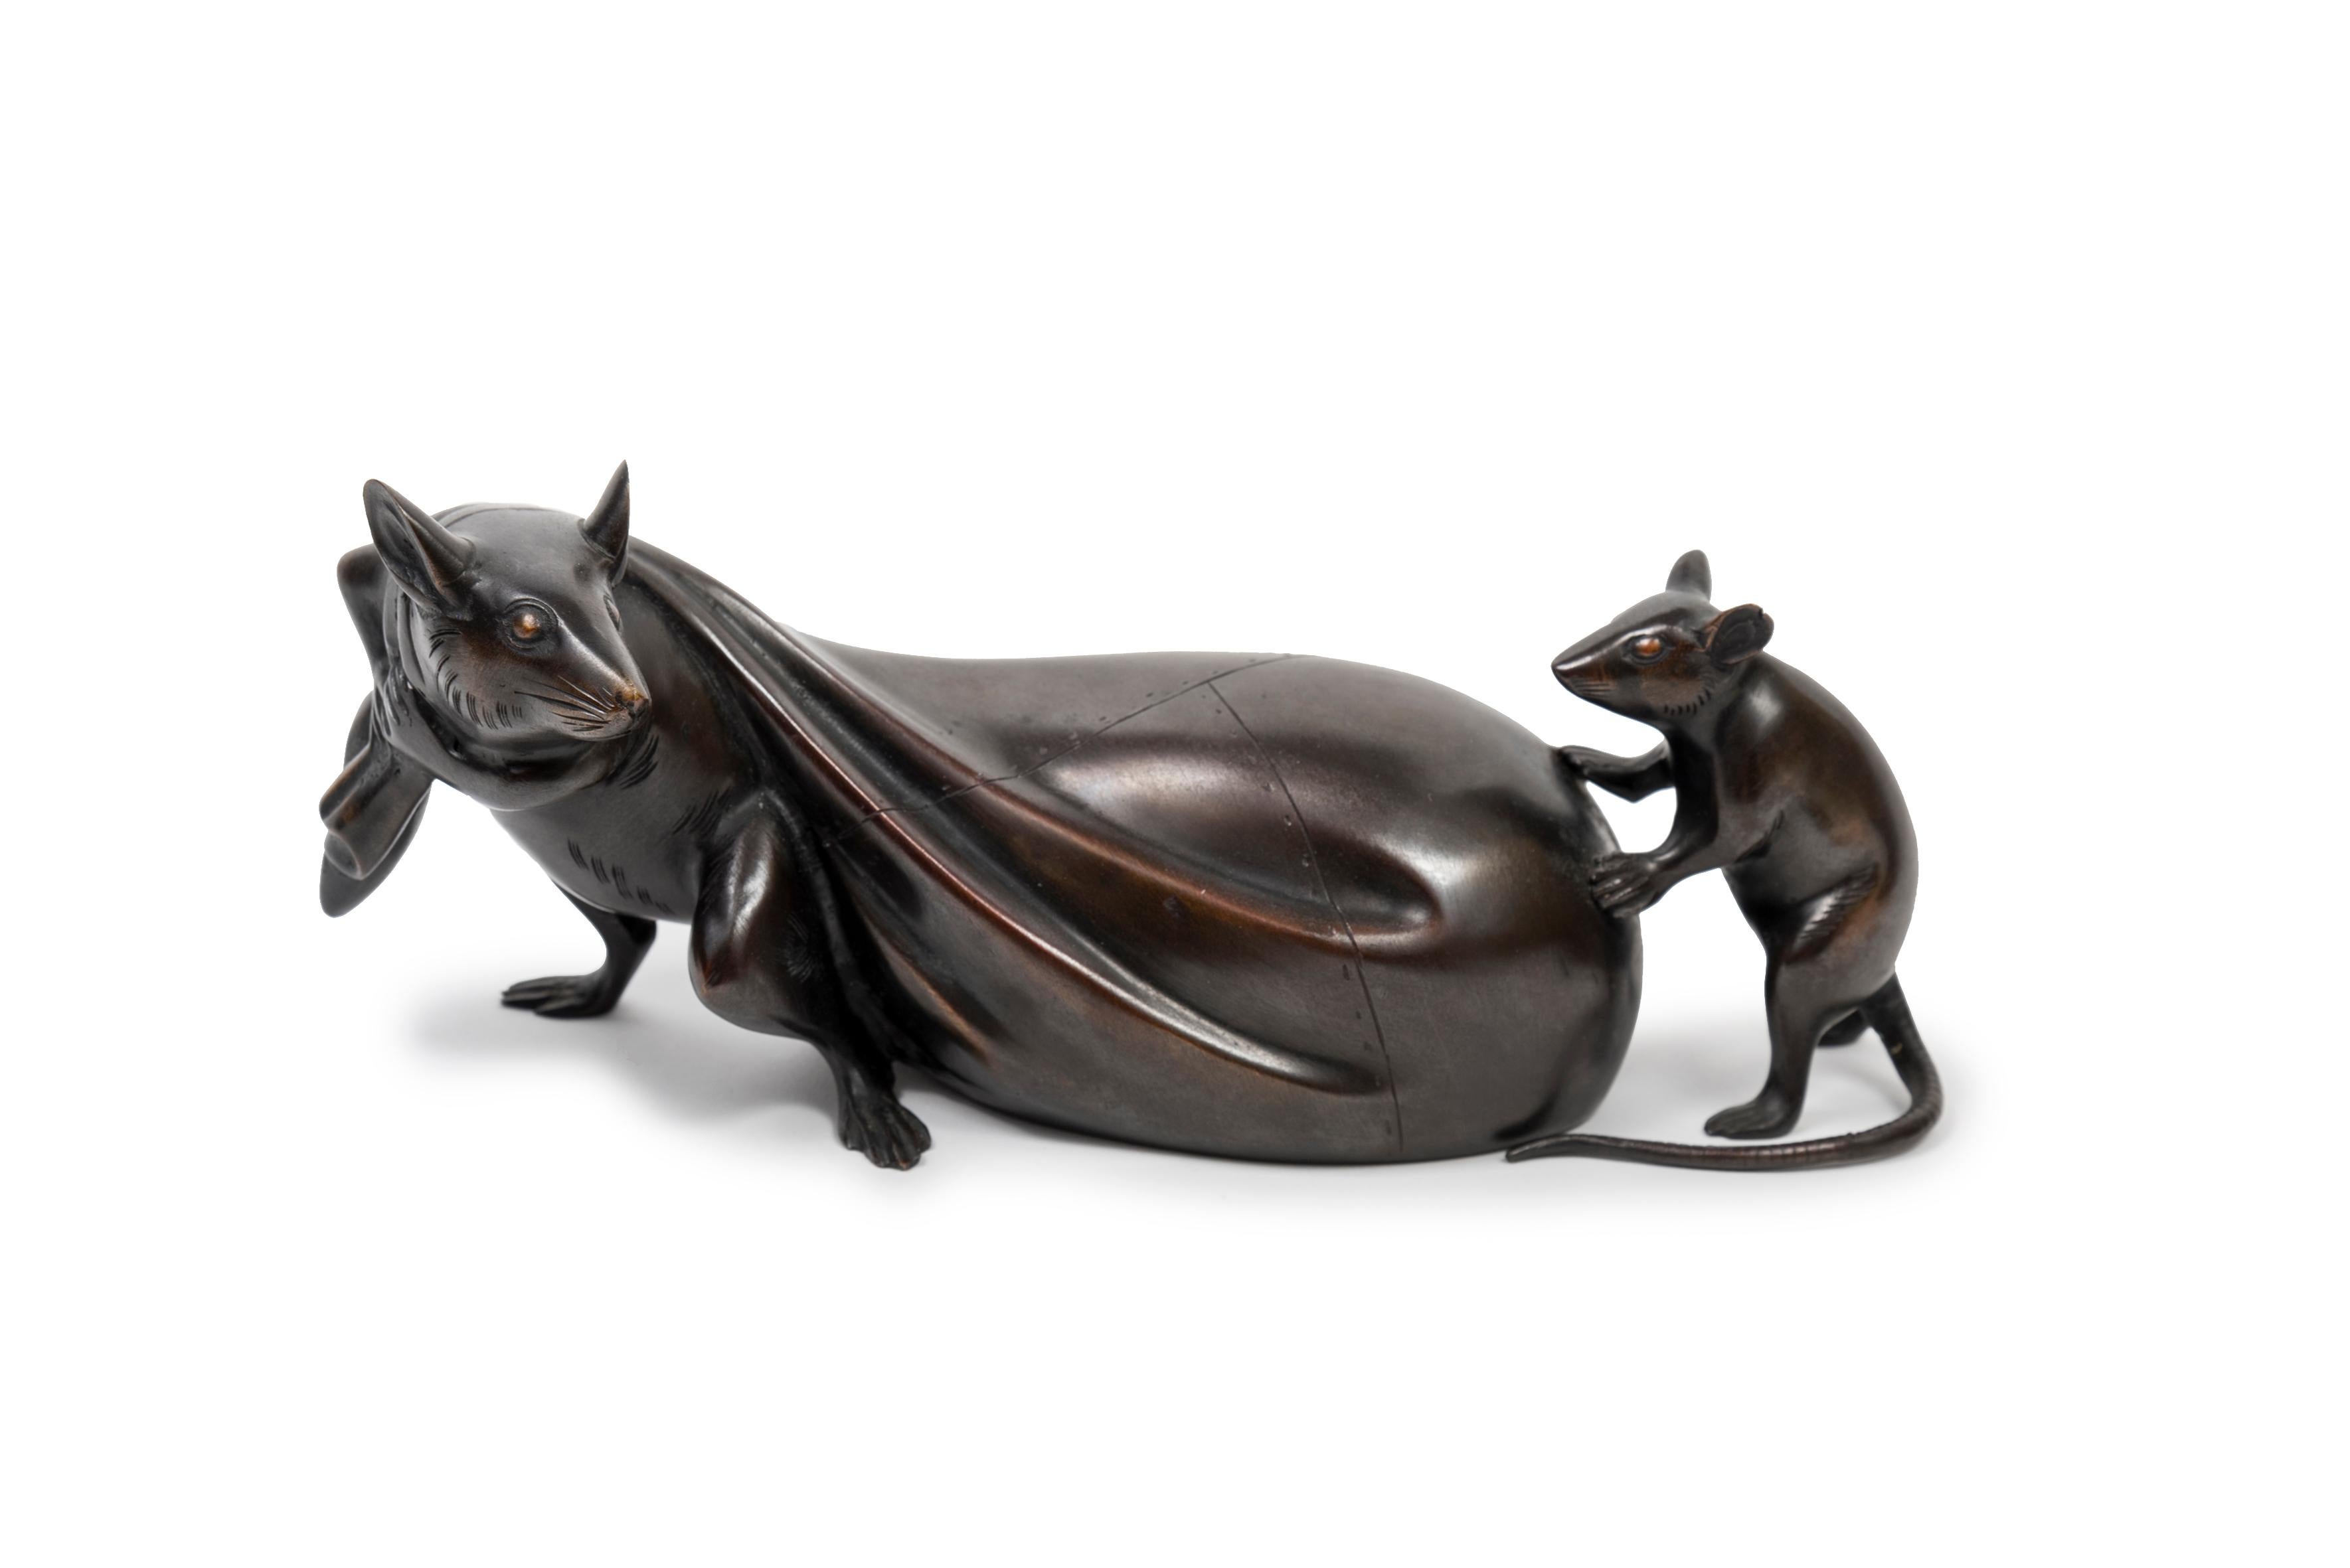 Japanese bronze representing two mice, one of them pulling a treasure bag. 

The mouse or the rat (both called nezumi in Japanese), one of the zodiac signs, is a symbol of fortune. This bag can be compared to the treasure bag of Hotei, one of the